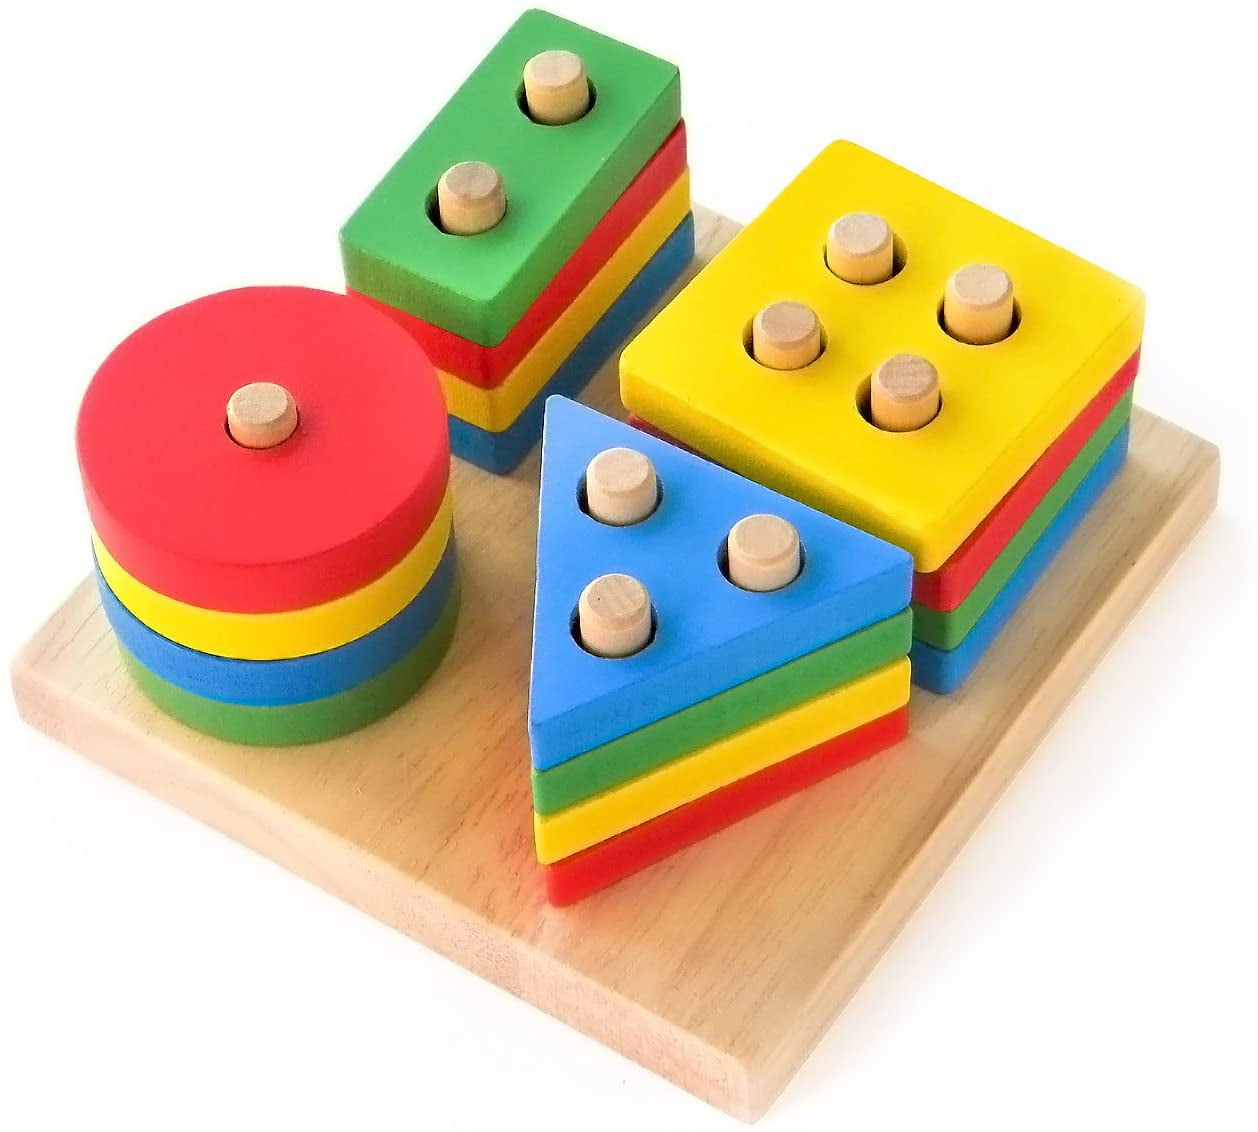 Kids Square Wooden Toy Stacking Block Puzzle Game Kids Early Educational Toy 